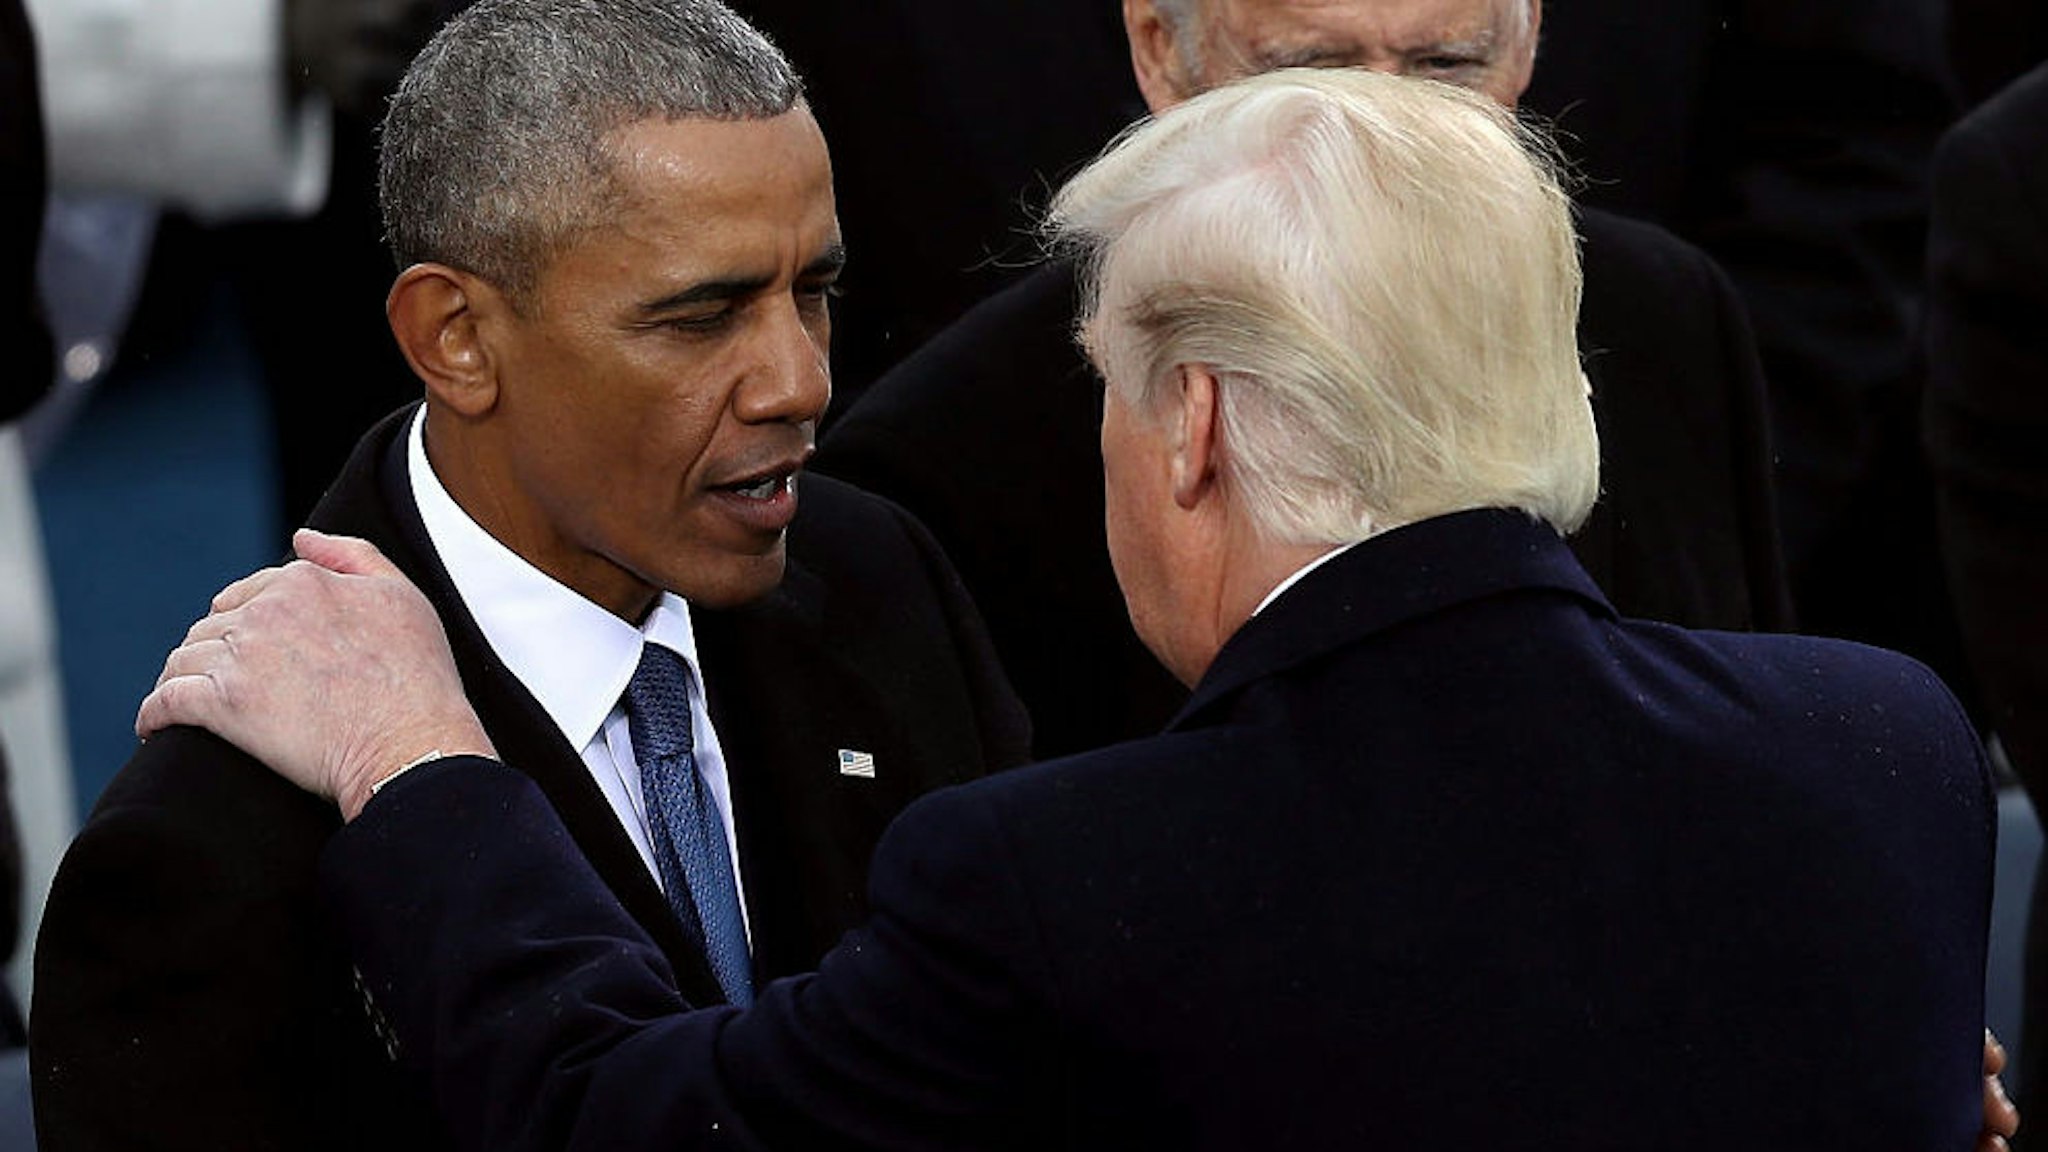 Former president Barack Obama greets President Donald Trump after his inauguration on the West Front of the U.S. Capitol on January 20, 2017 in Washington, DC.